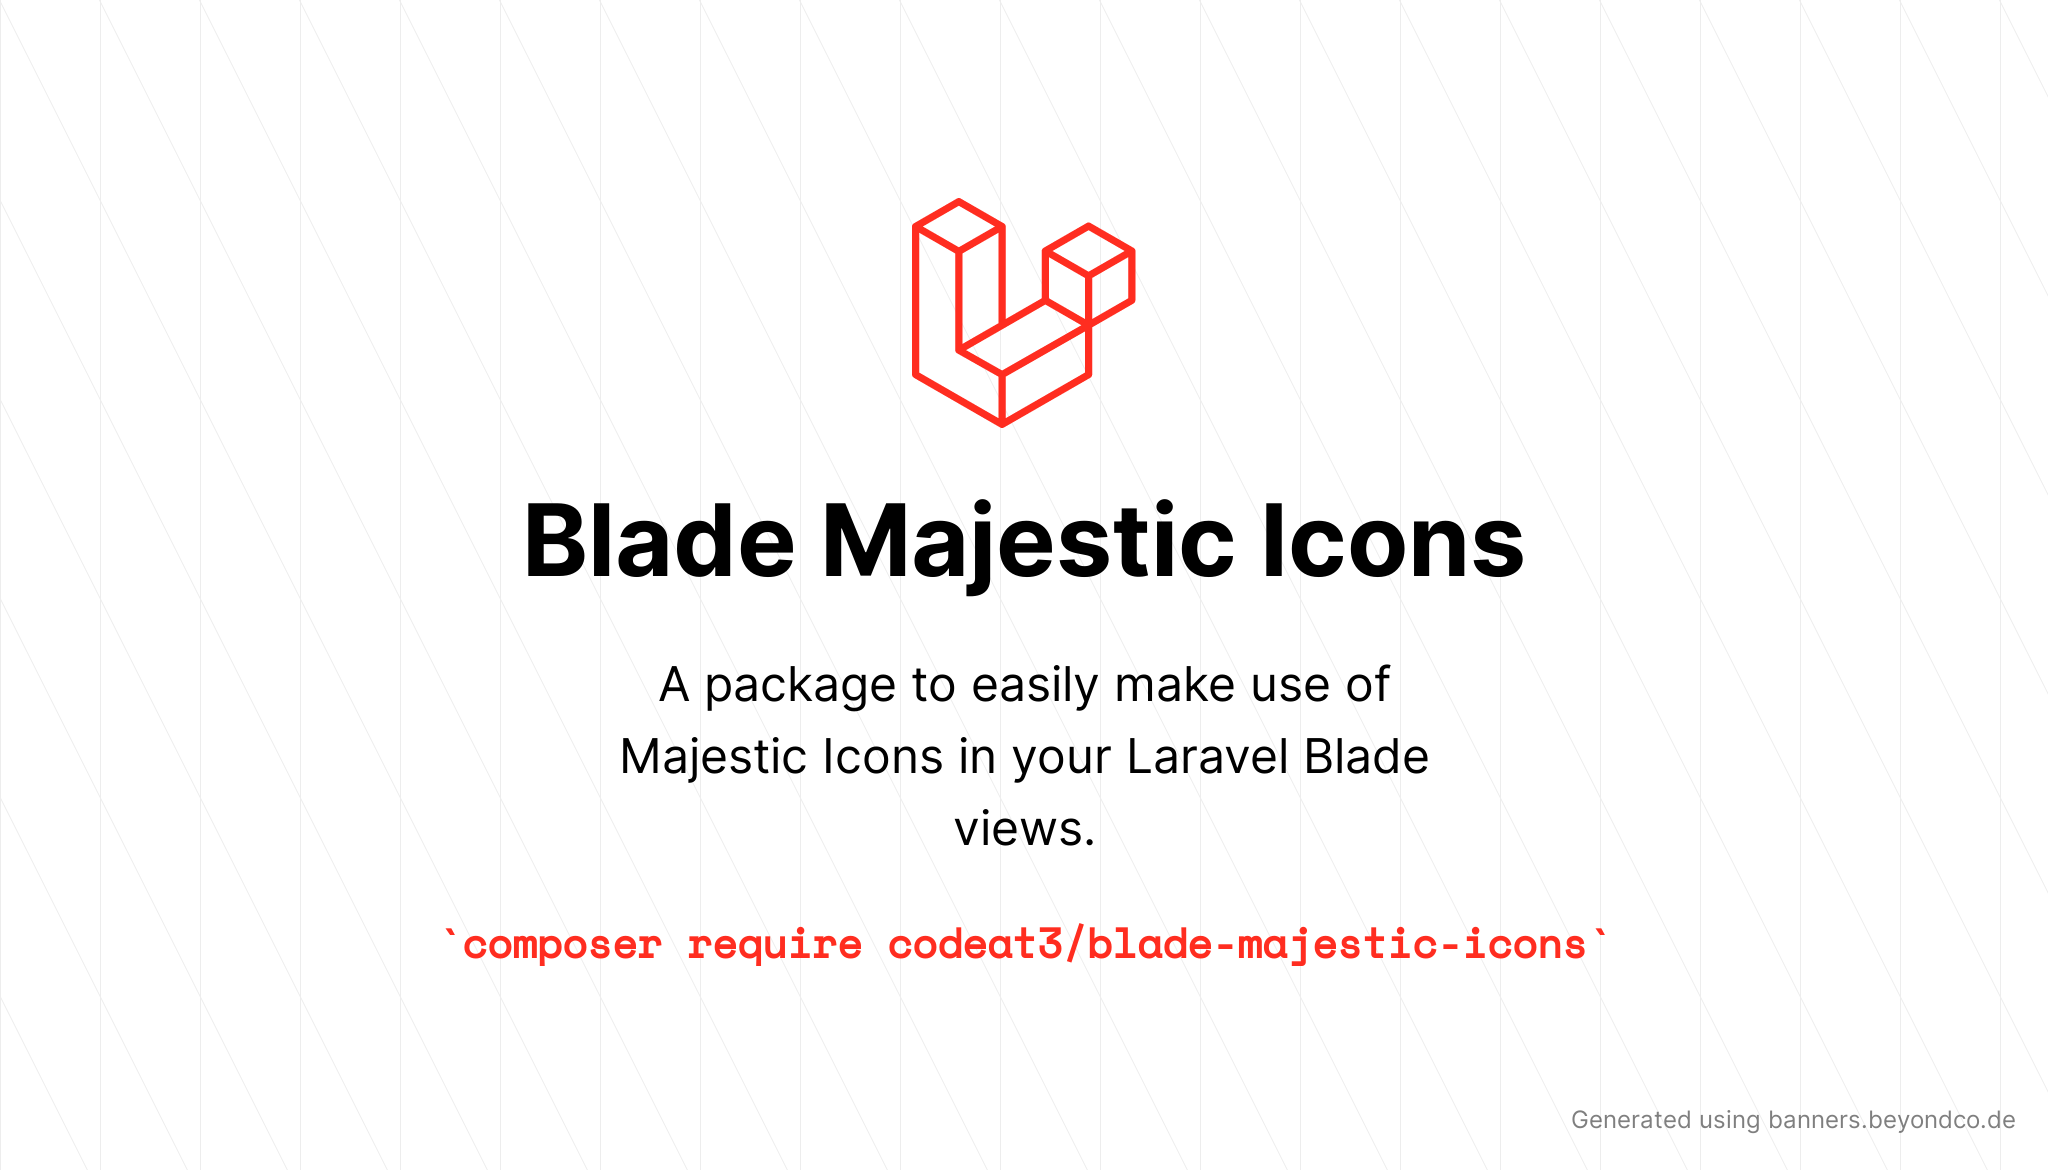 socialcard-blade-majestic-icons.png